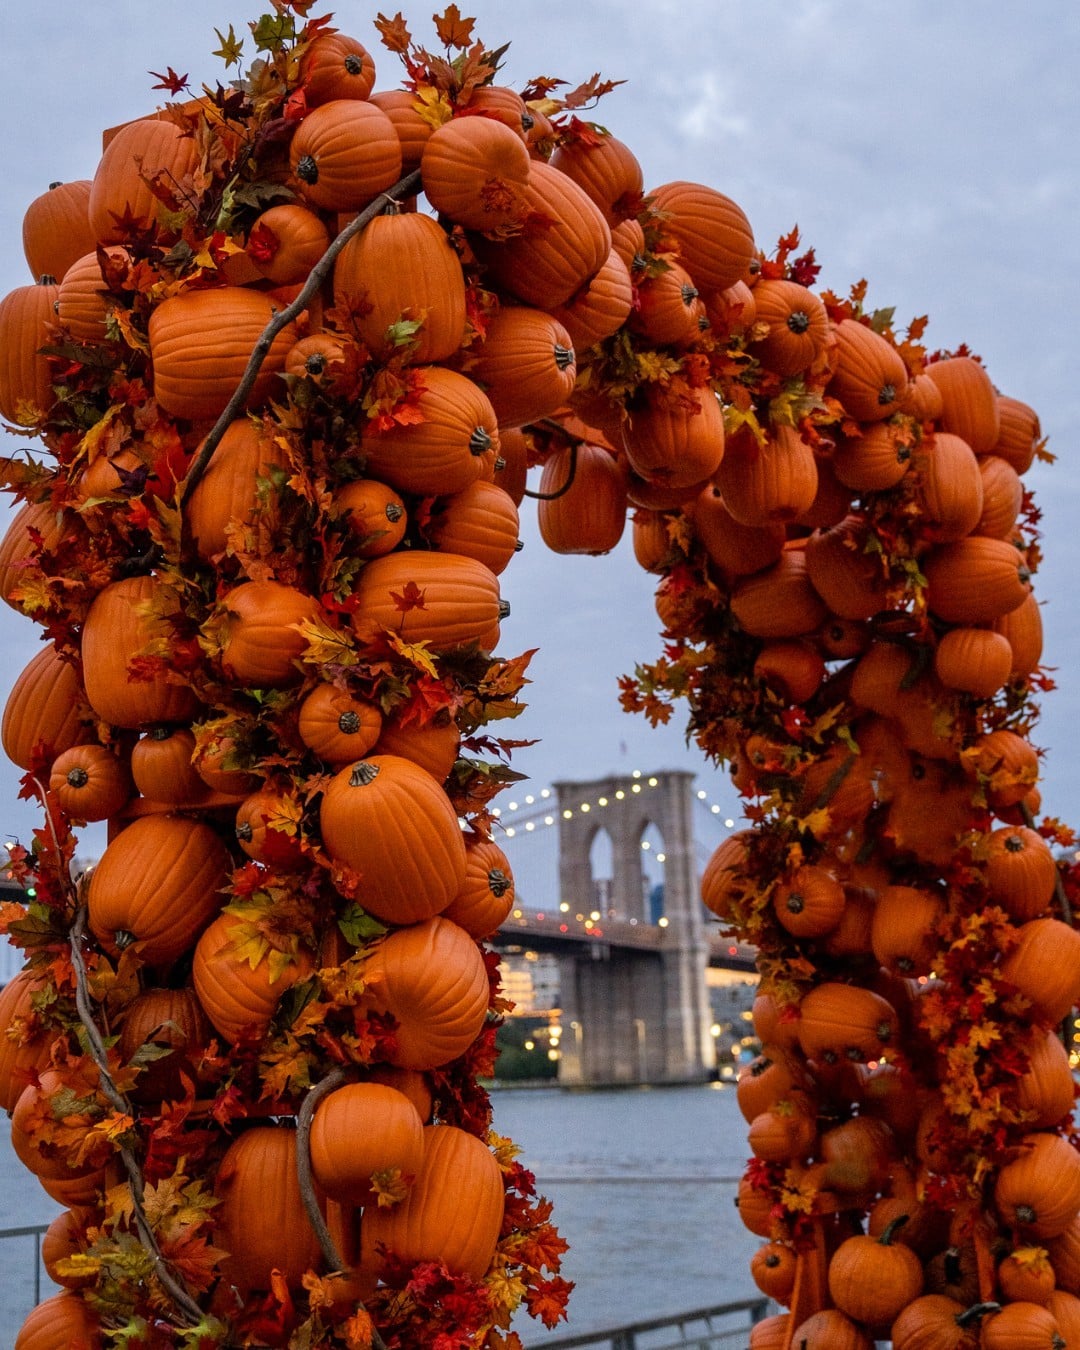 Pumpkins. Fall foliage. The Brooklyn Bridge. NYC’s favorite fall photo-op is back and better than ever 📸 Stroll down Fulton Street to Pier 17 to discover a bountiful seasonal frame to elevate your seasonal photos. 🗓️ Sept 27 – Nov 7  Heineken Riverdeck Details ➤ link in bio #TheSeaport